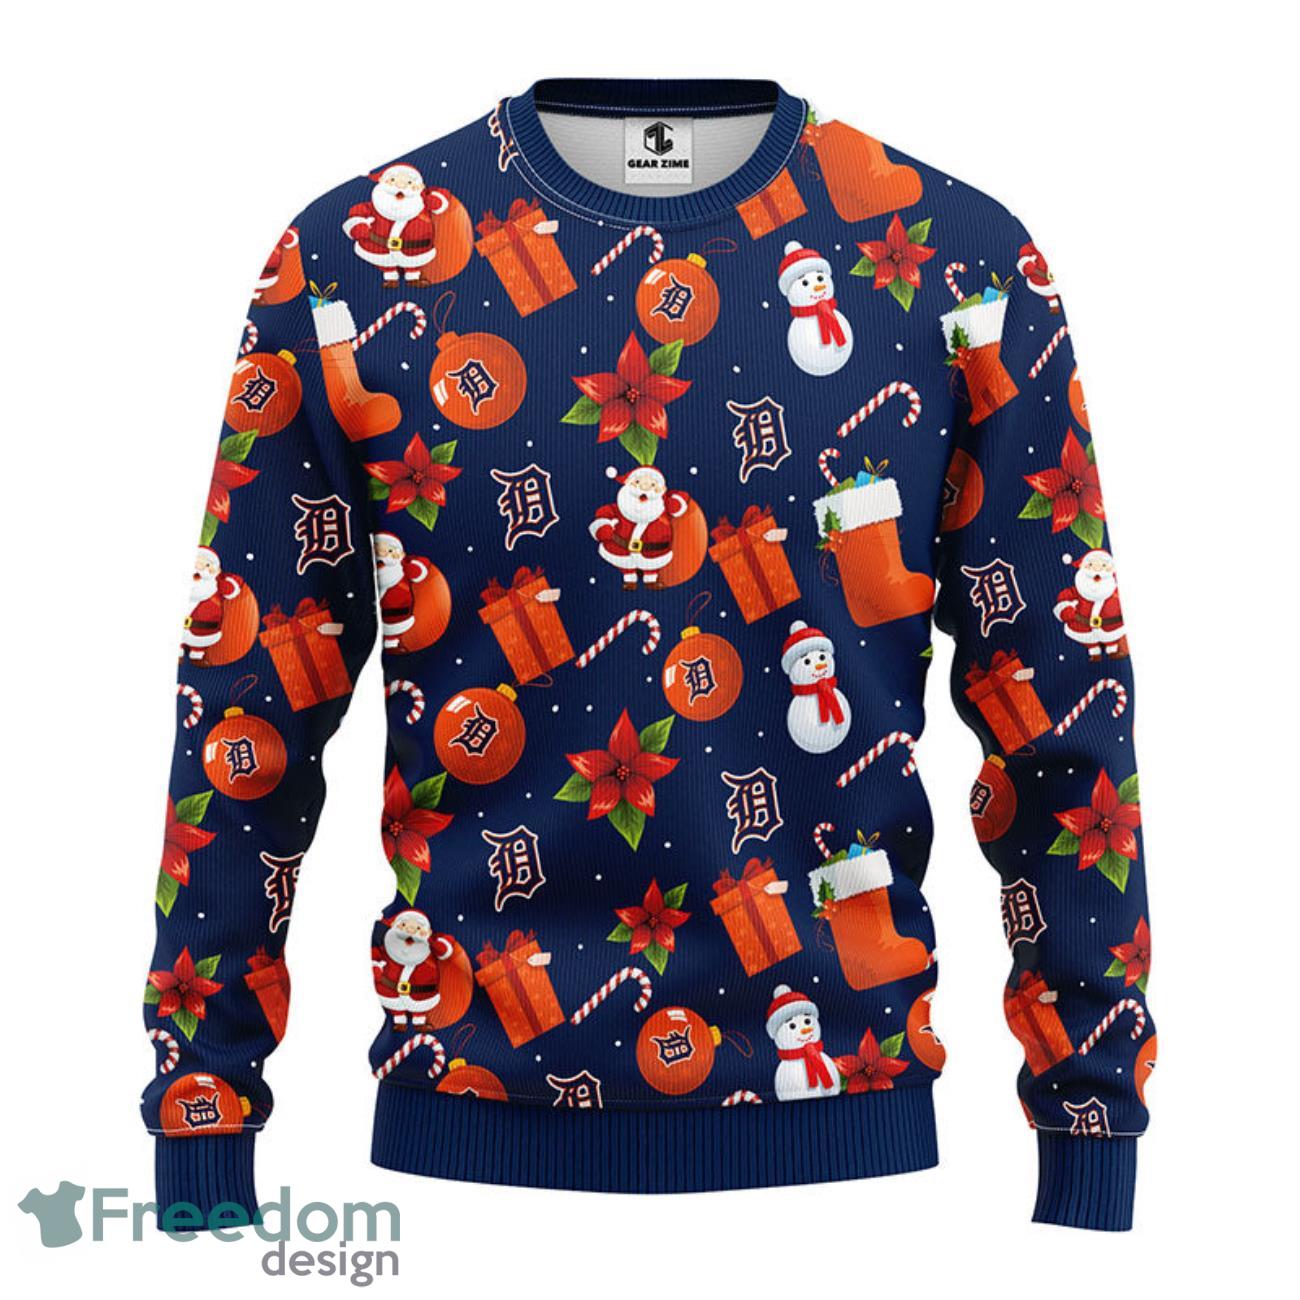 Detroit Tigers Santa Claus Snowman Christmas Ugly Sweater - Freedomdesign